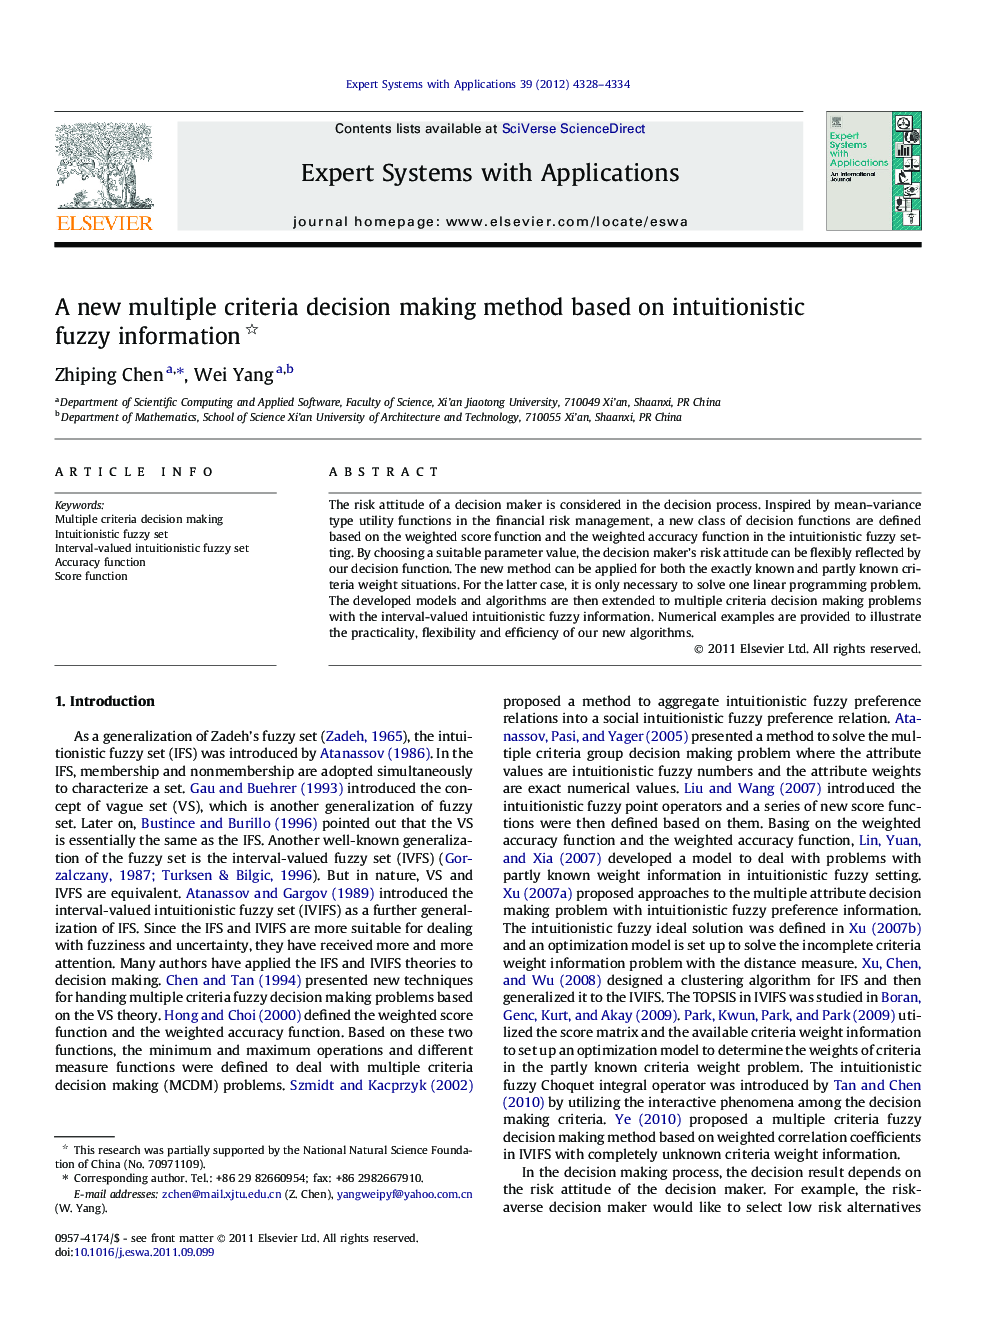 A new multiple criteria decision making method based on intuitionistic fuzzy information 